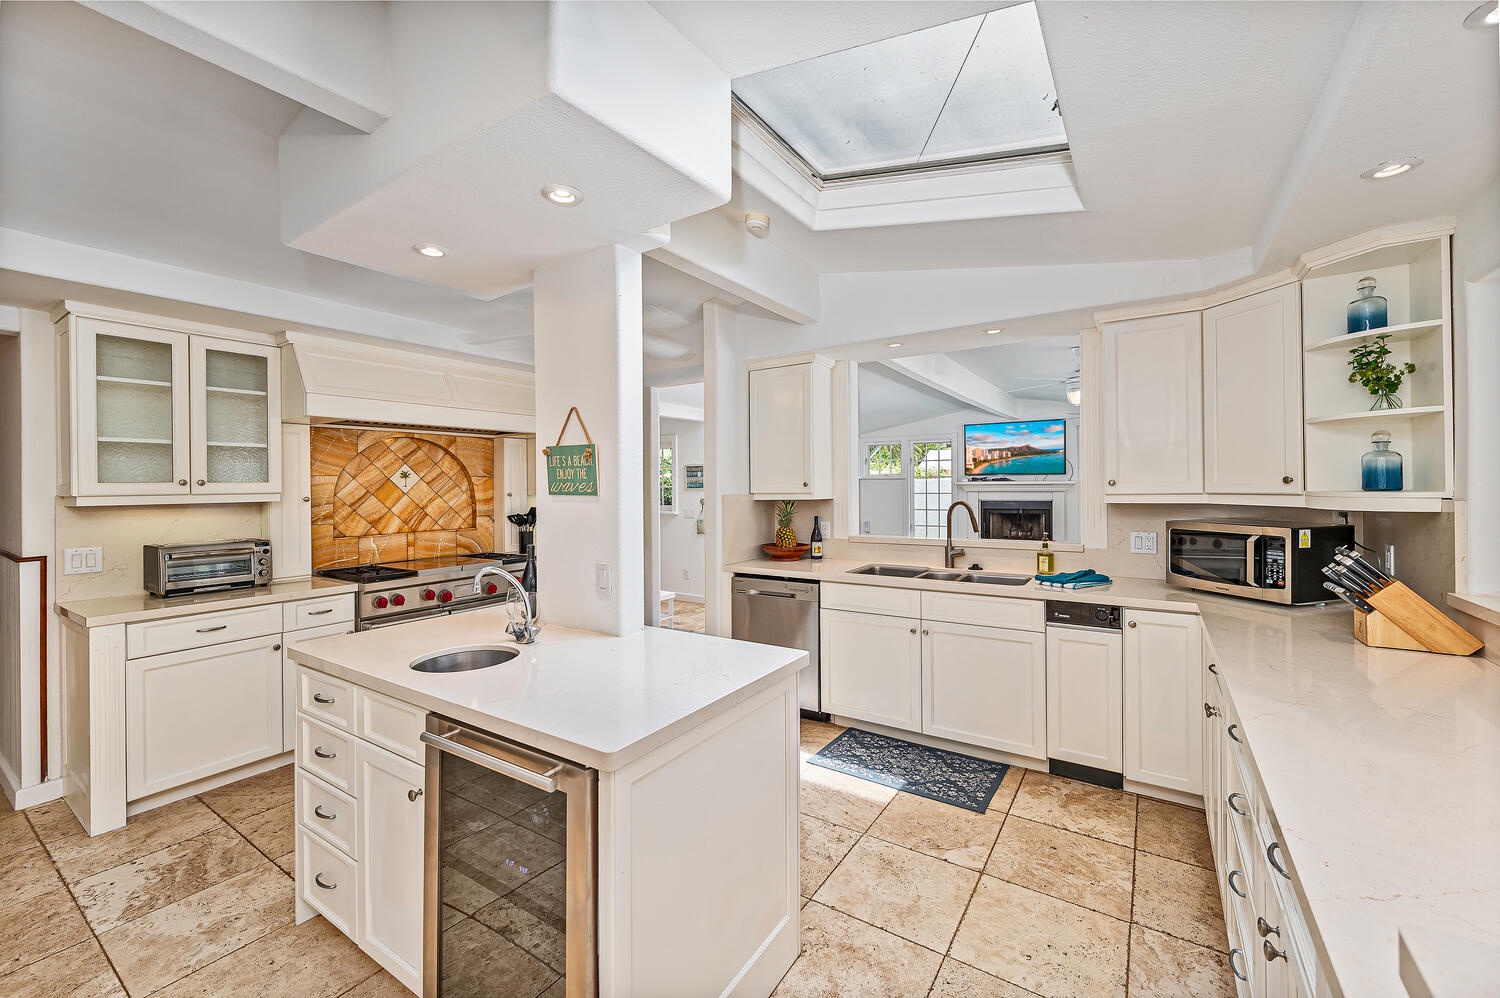 Kailua Vacation Rentals, Villa Hui Hou - Open concept chefs kitchen with top of the line appliances.